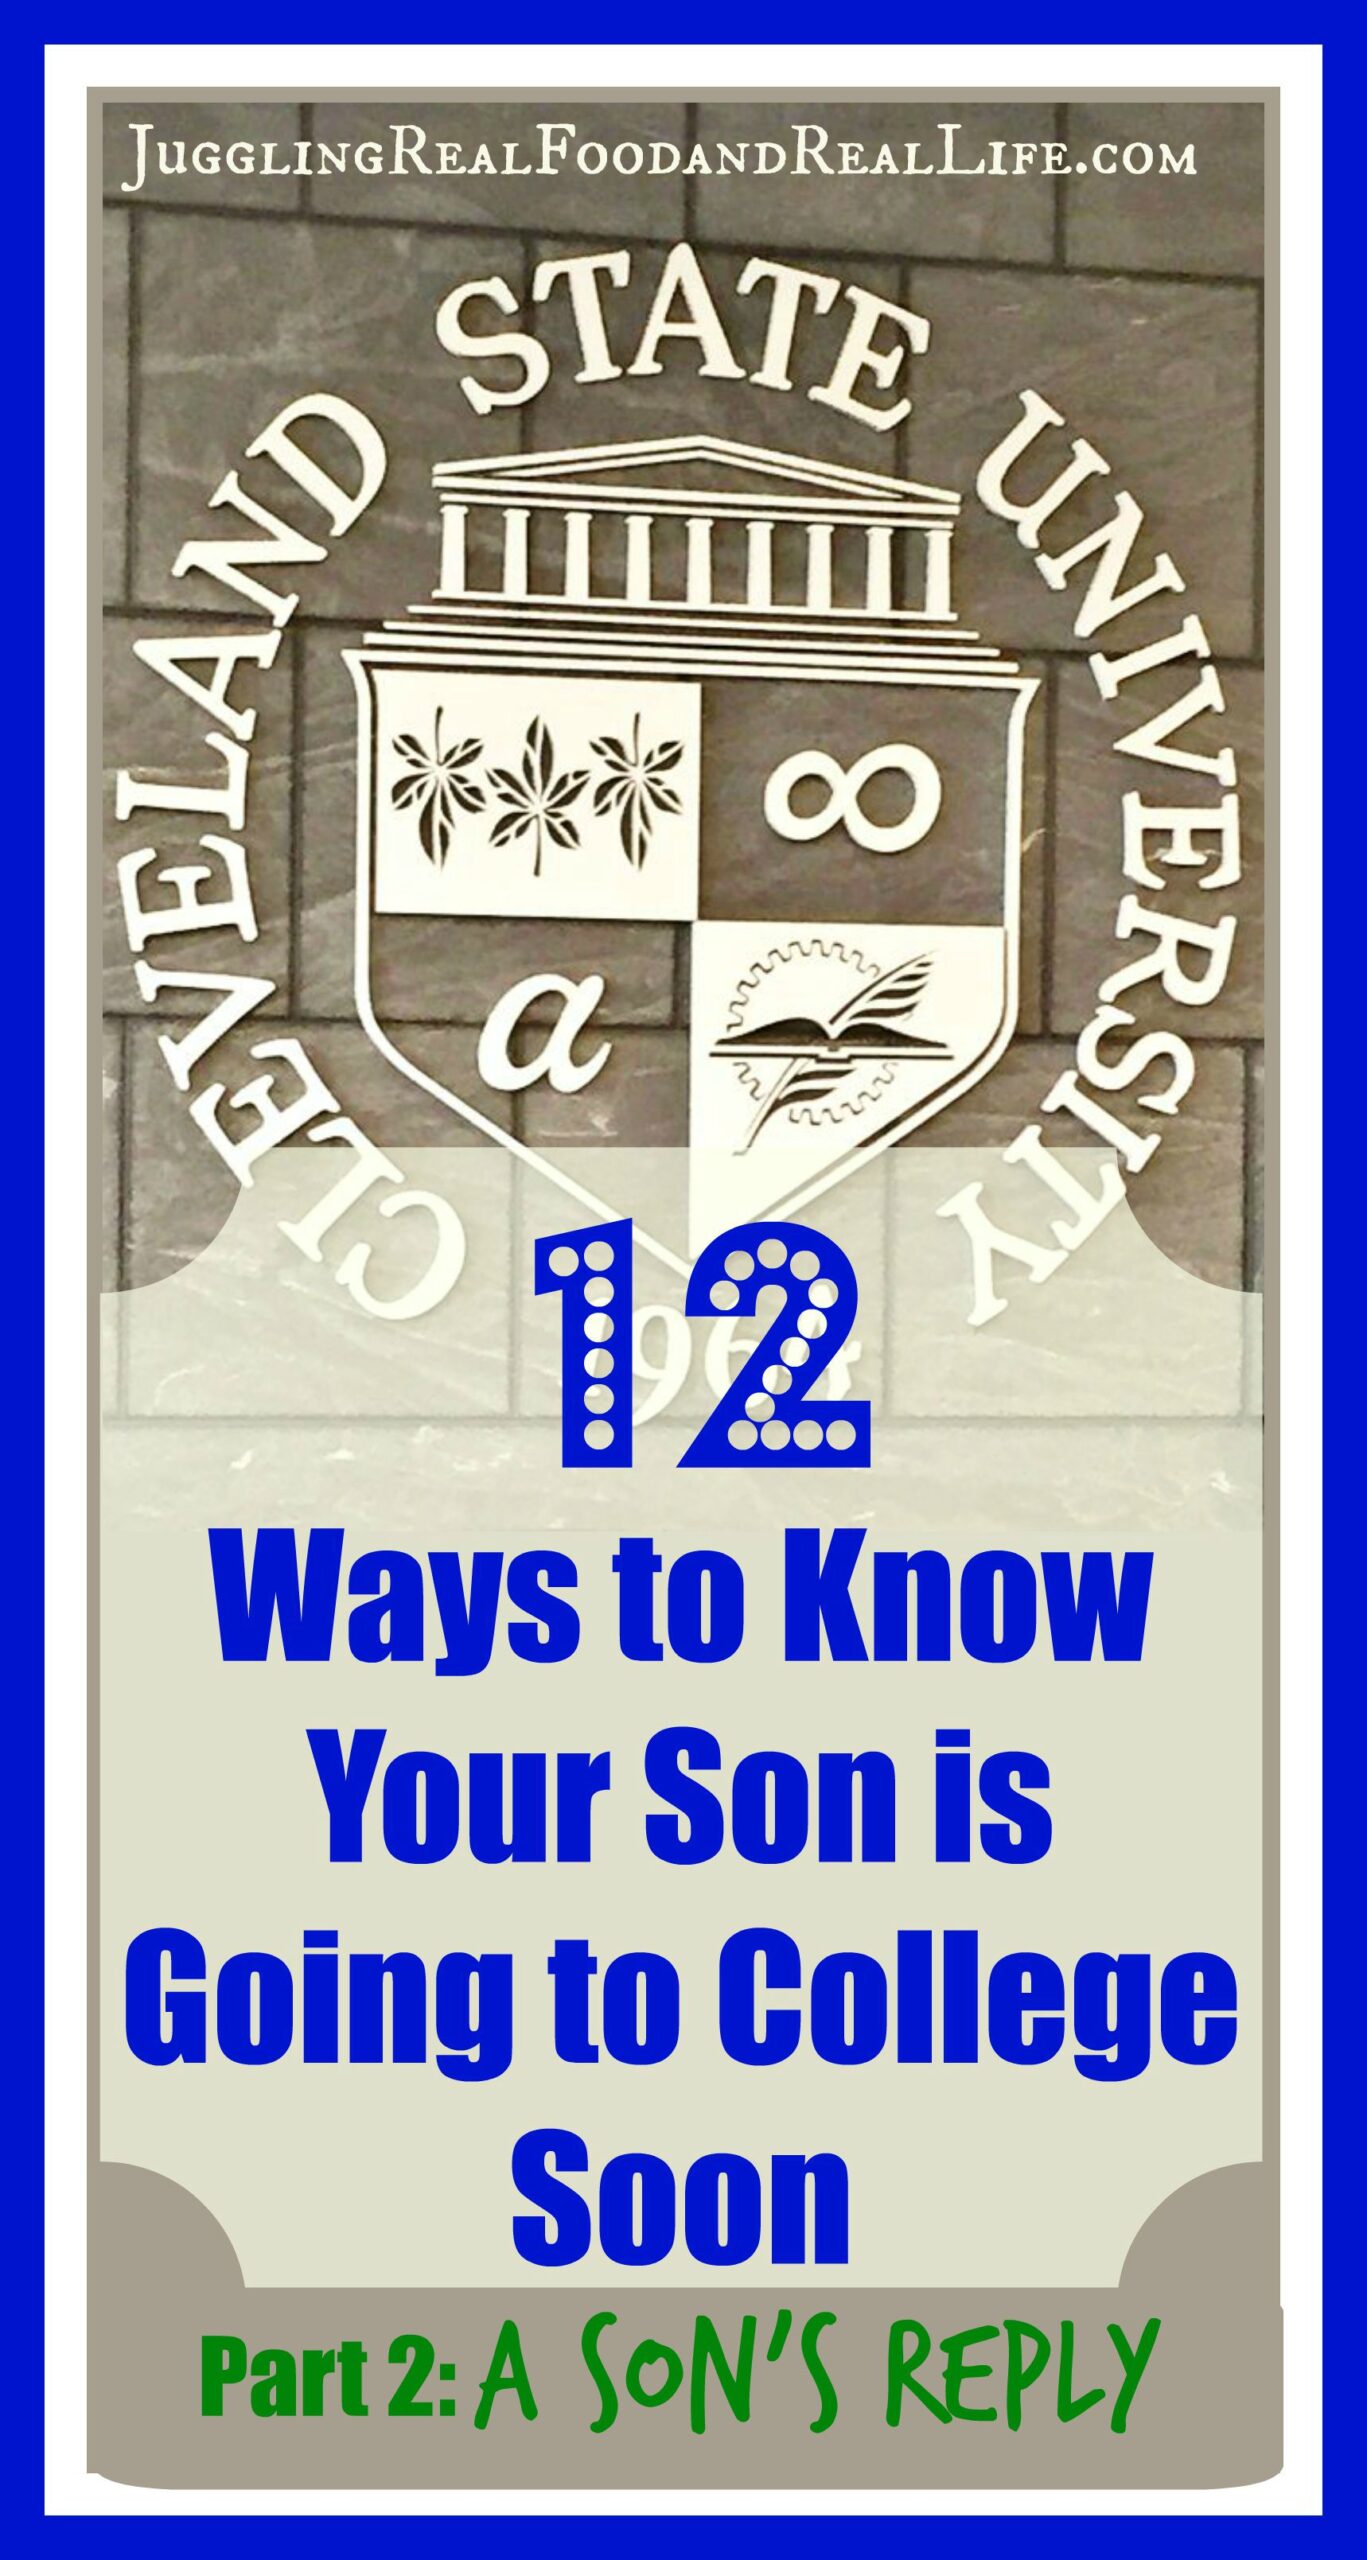 12 Ways You Know Your Son is Going to College Soon Part 2: A Son’s Reply